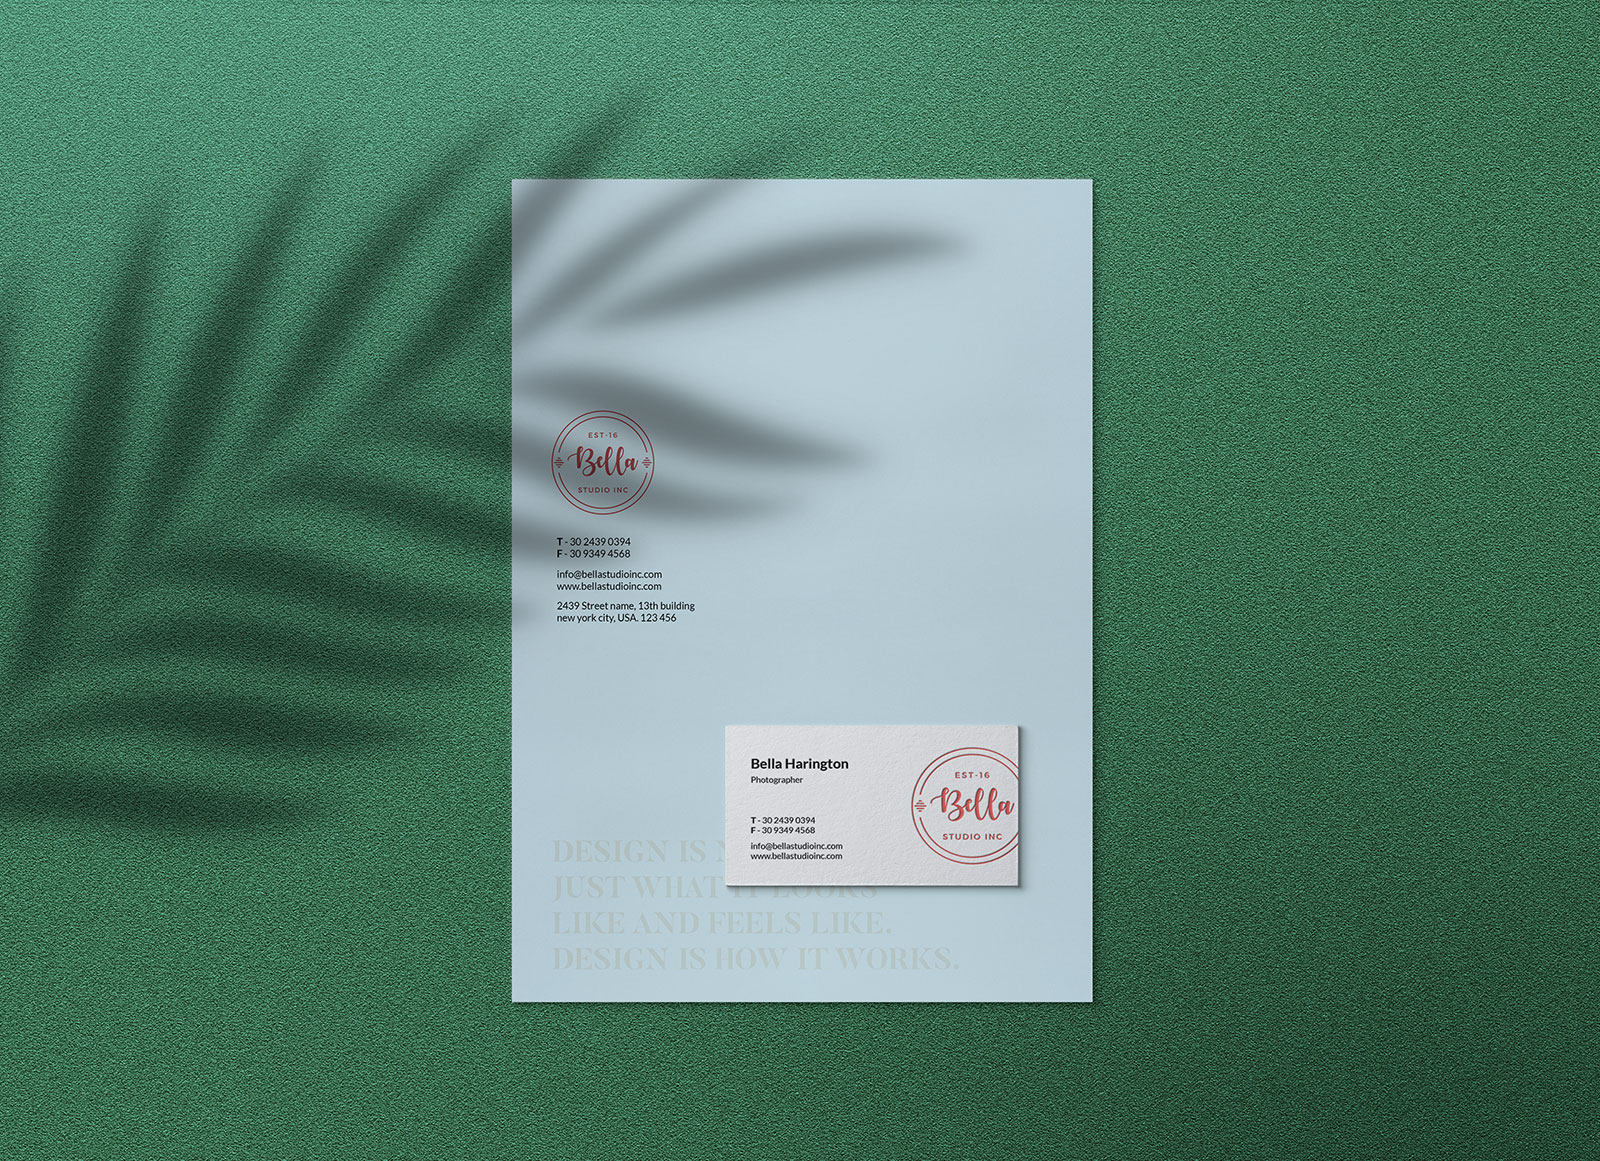 Free-Letterhead-&-Business-Card-Mockup-PSD-With-Shadow-Overlay